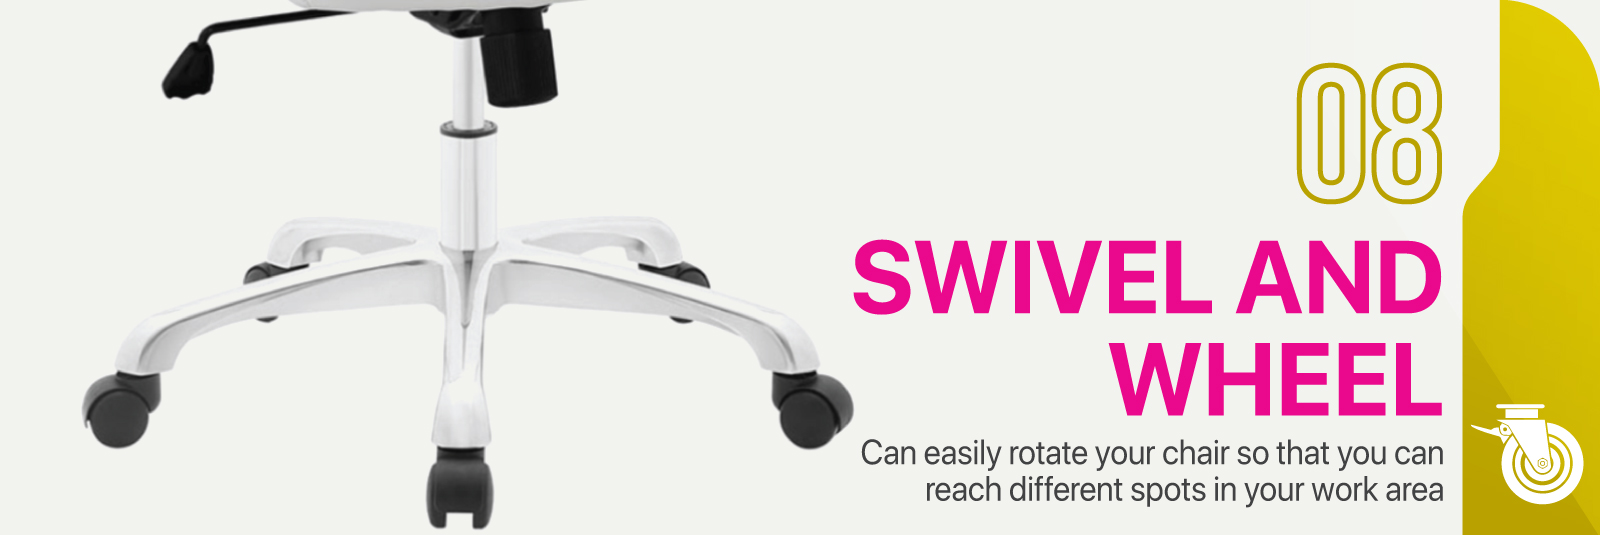 Swivel and Wheel - Can easily rotate your chairs so that you can reach different spots in your work area.